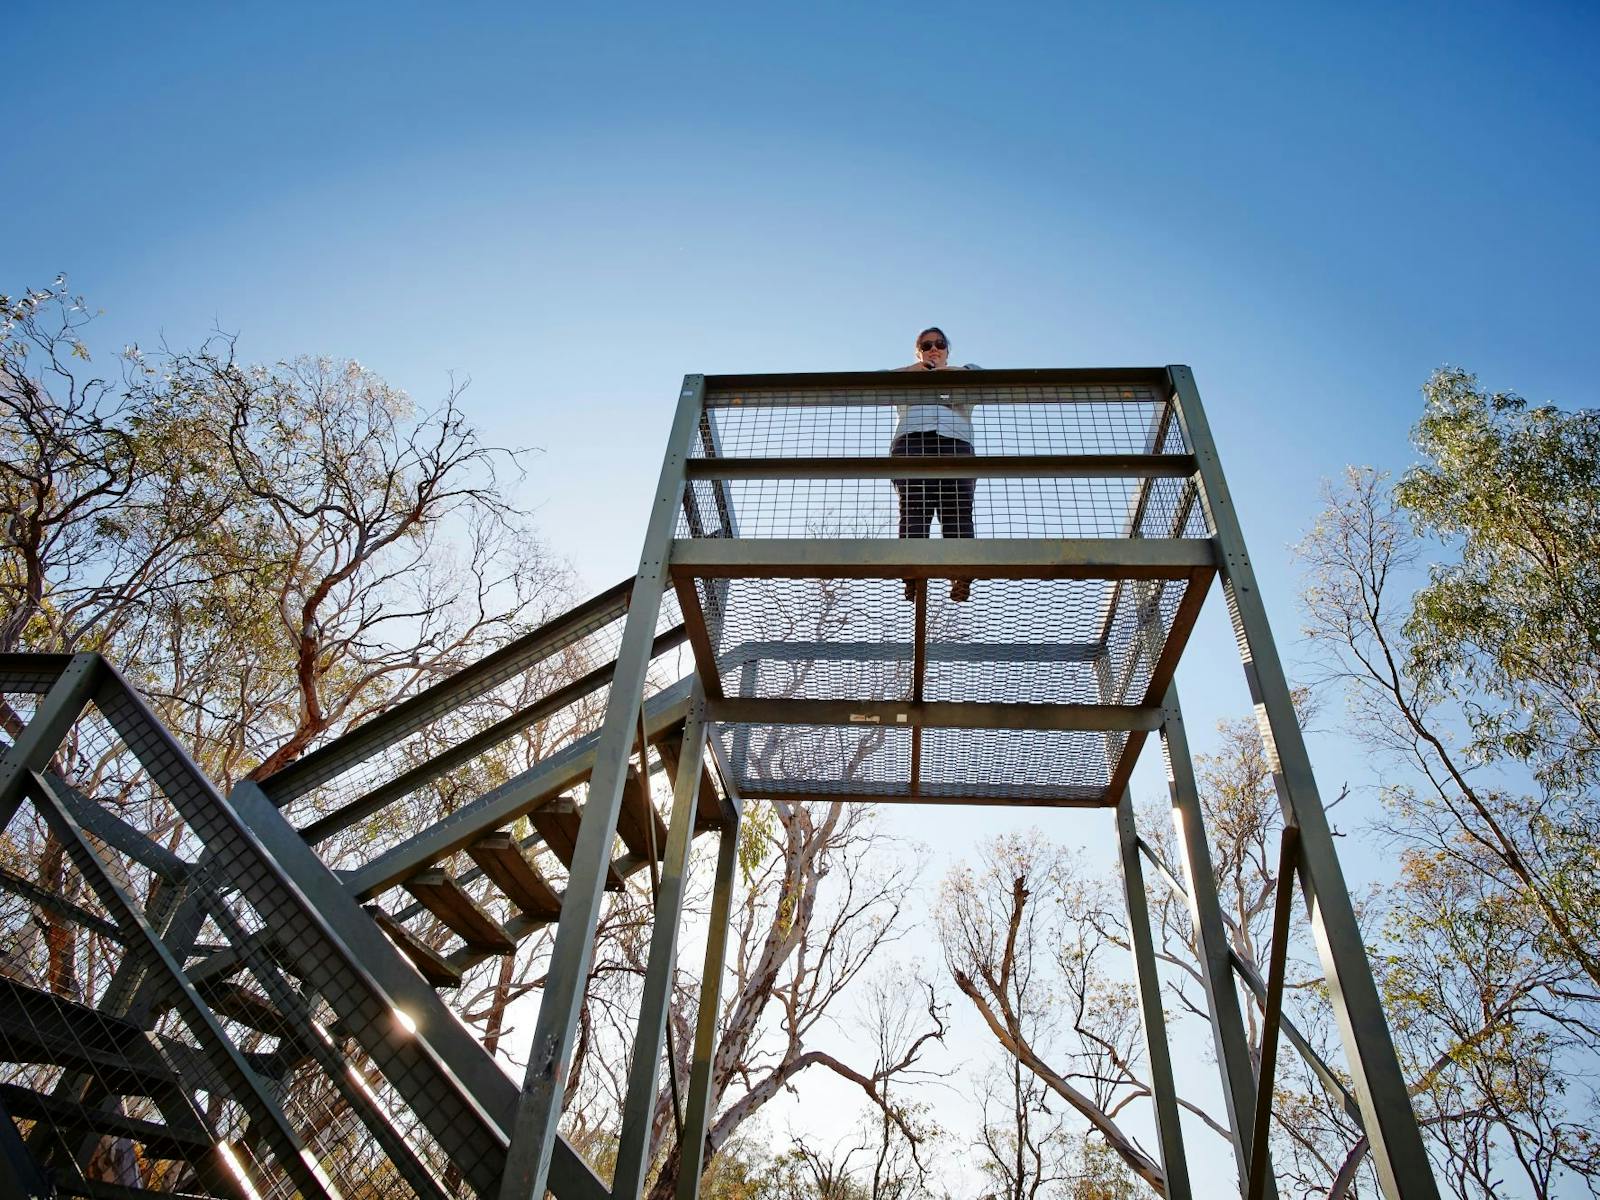 Person standing on lookout tower platform, steps and rails on left side, trees, leaves, blue sky